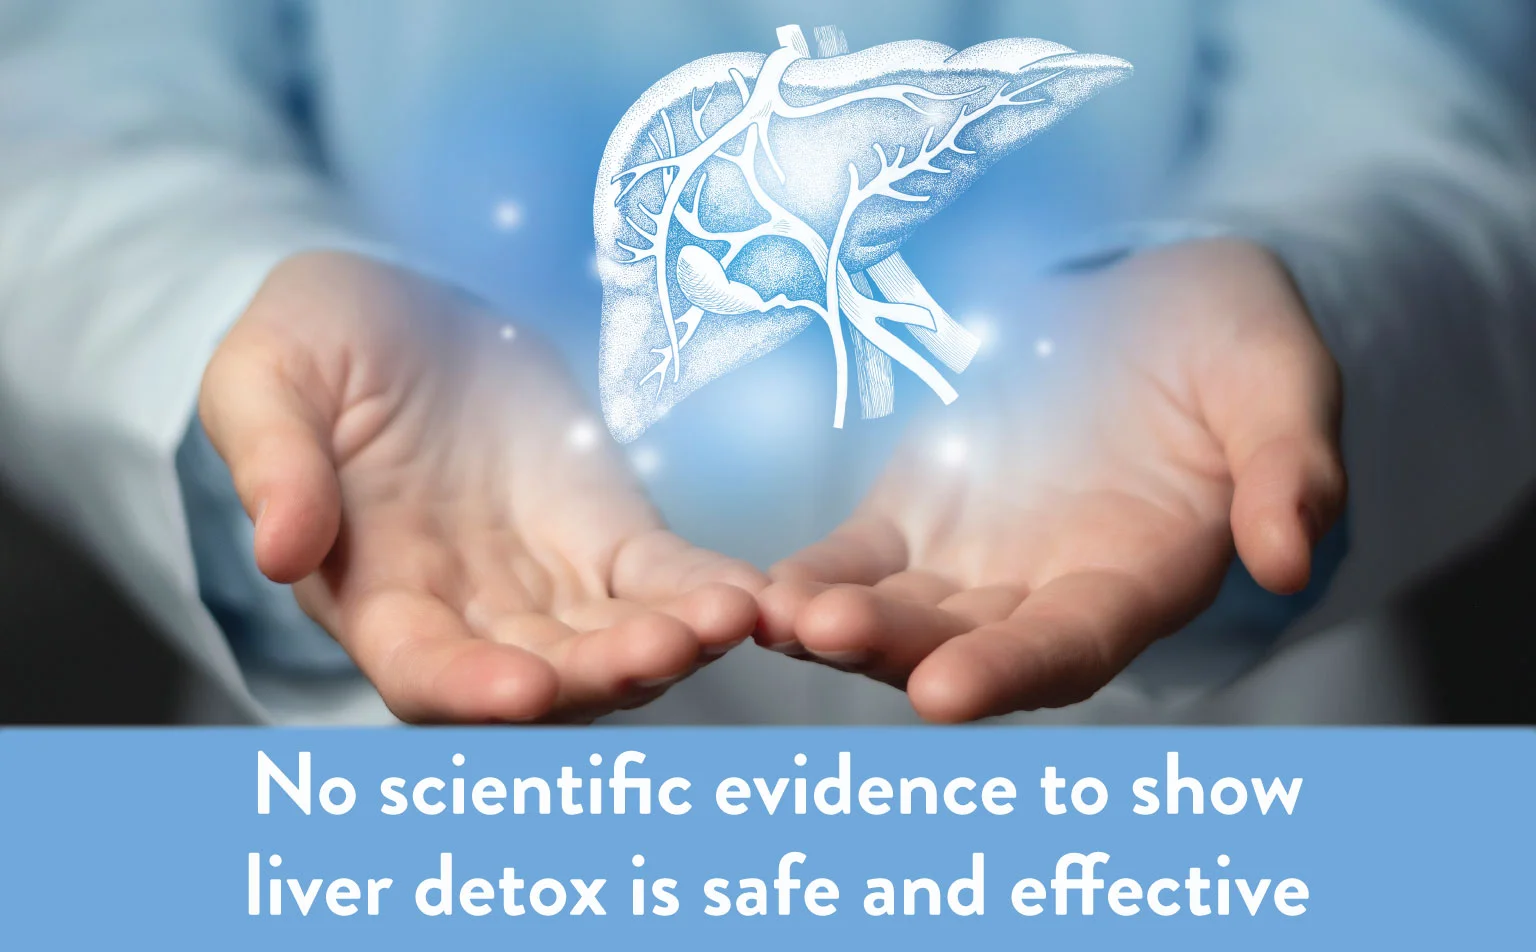 No Scientific Evidence to show Liver Detox is Safe and Effective